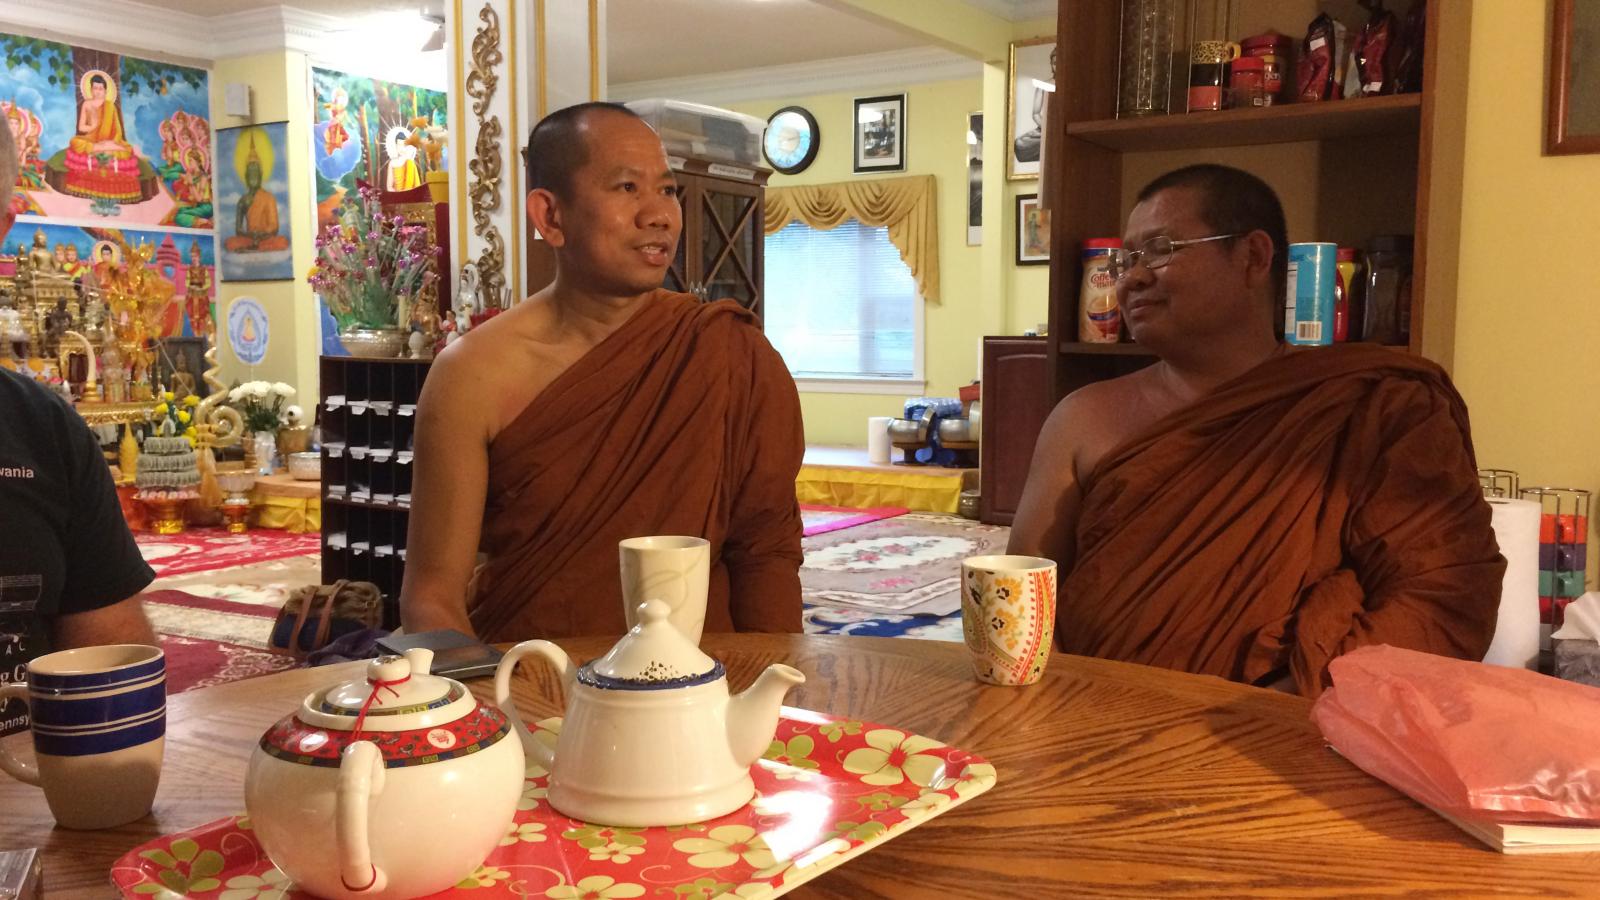 After the chanting and meditating session the house monks, Ajanh Sun Palee and Ajanh Thong Dee, have an opportunity to practice their English conversation skills over tea with guests. 